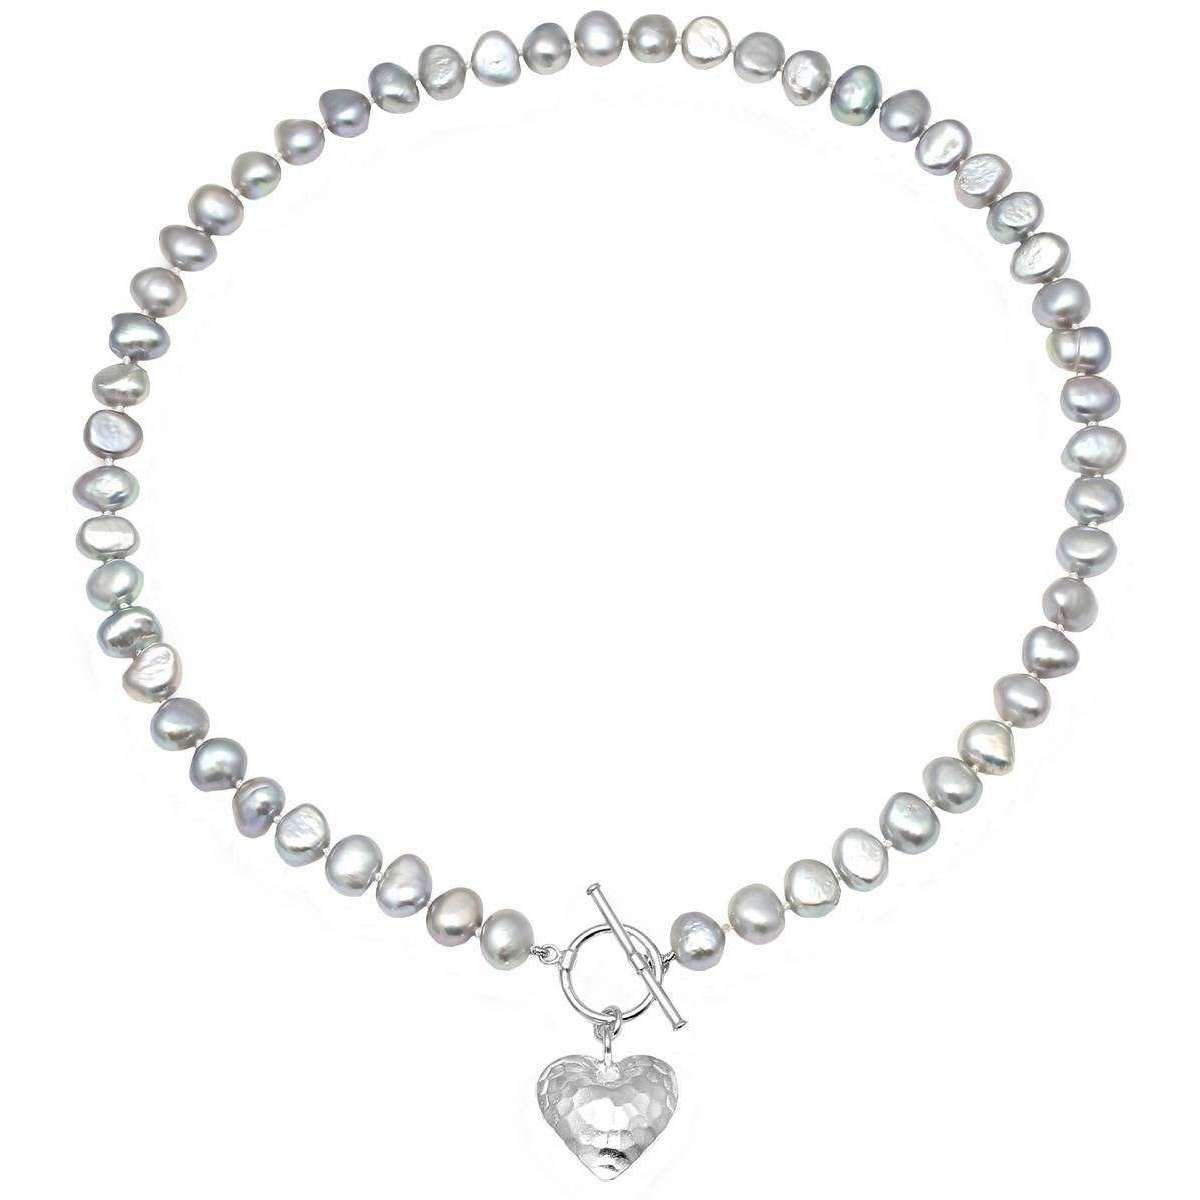 Pearls of the Orient Amare Hammered Heart Freshwater Pearl Necklace - Silver/Grey